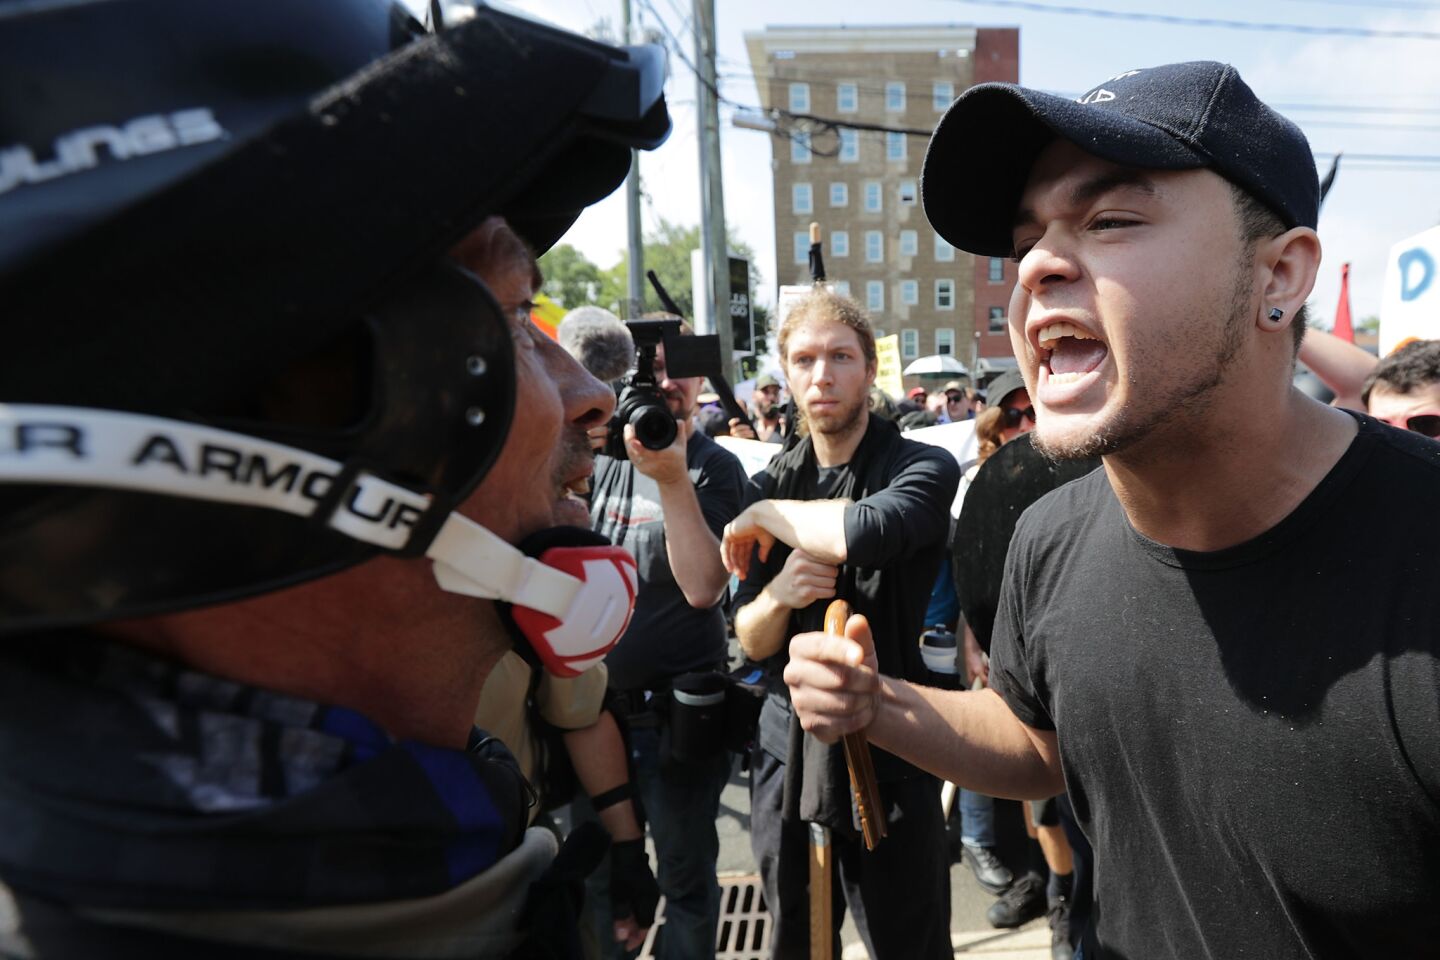 White nationalists, neo-Nazis and members of the "alt-right" square off against counter-protesters on Saturday, Aug. 12, 2017, in Charlottesville, Va.